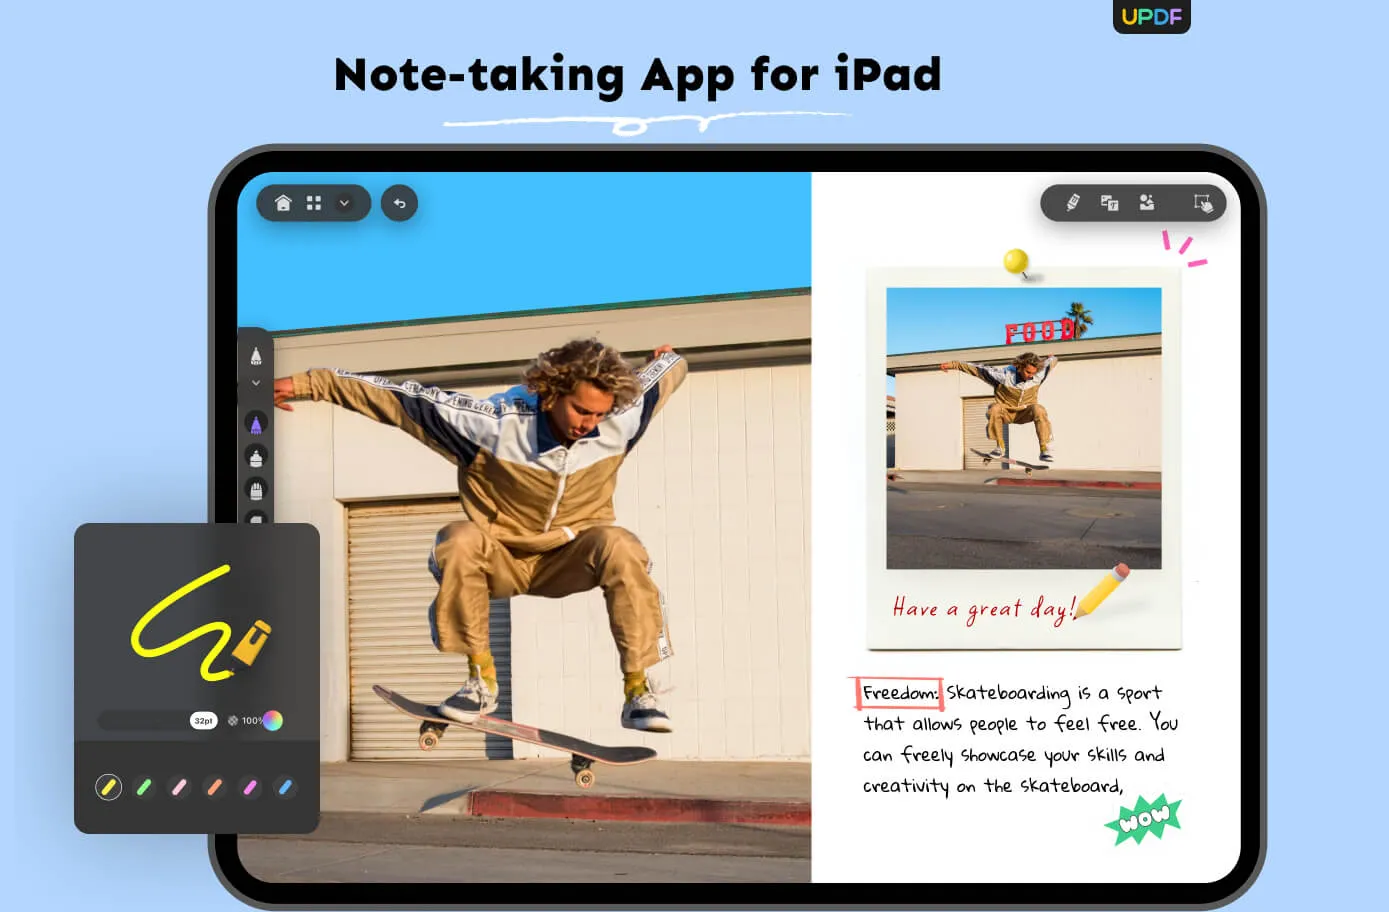 Note taking app for iPad UPDF